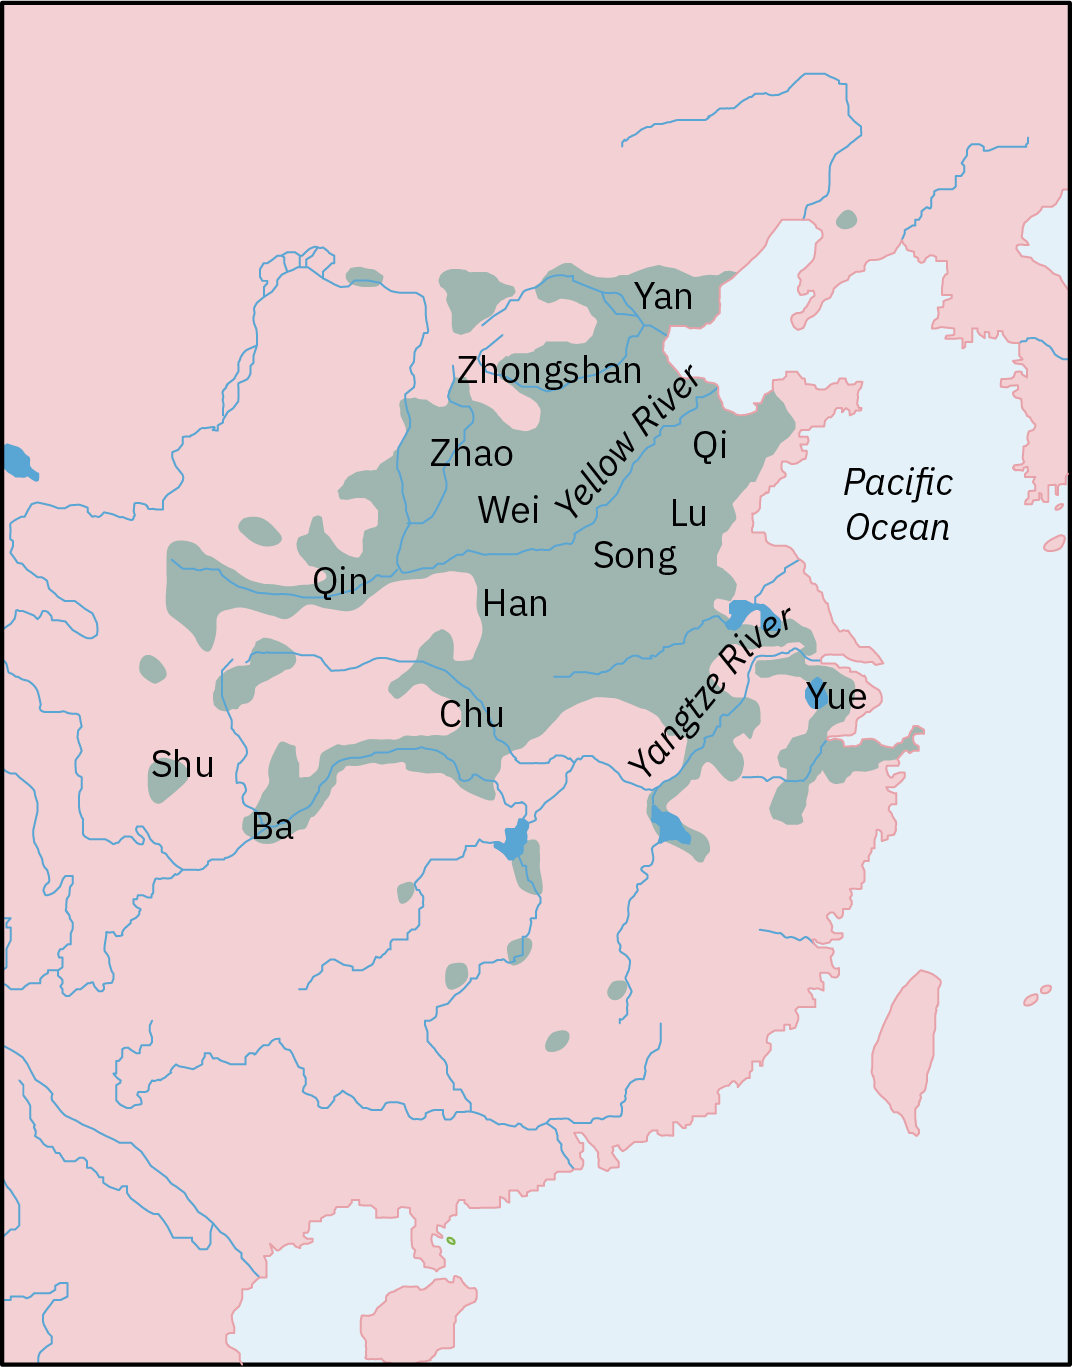 A map of the Warring States period in ancient China(ca. 475-221 BCE) shows parts of China with social unrest and discord.